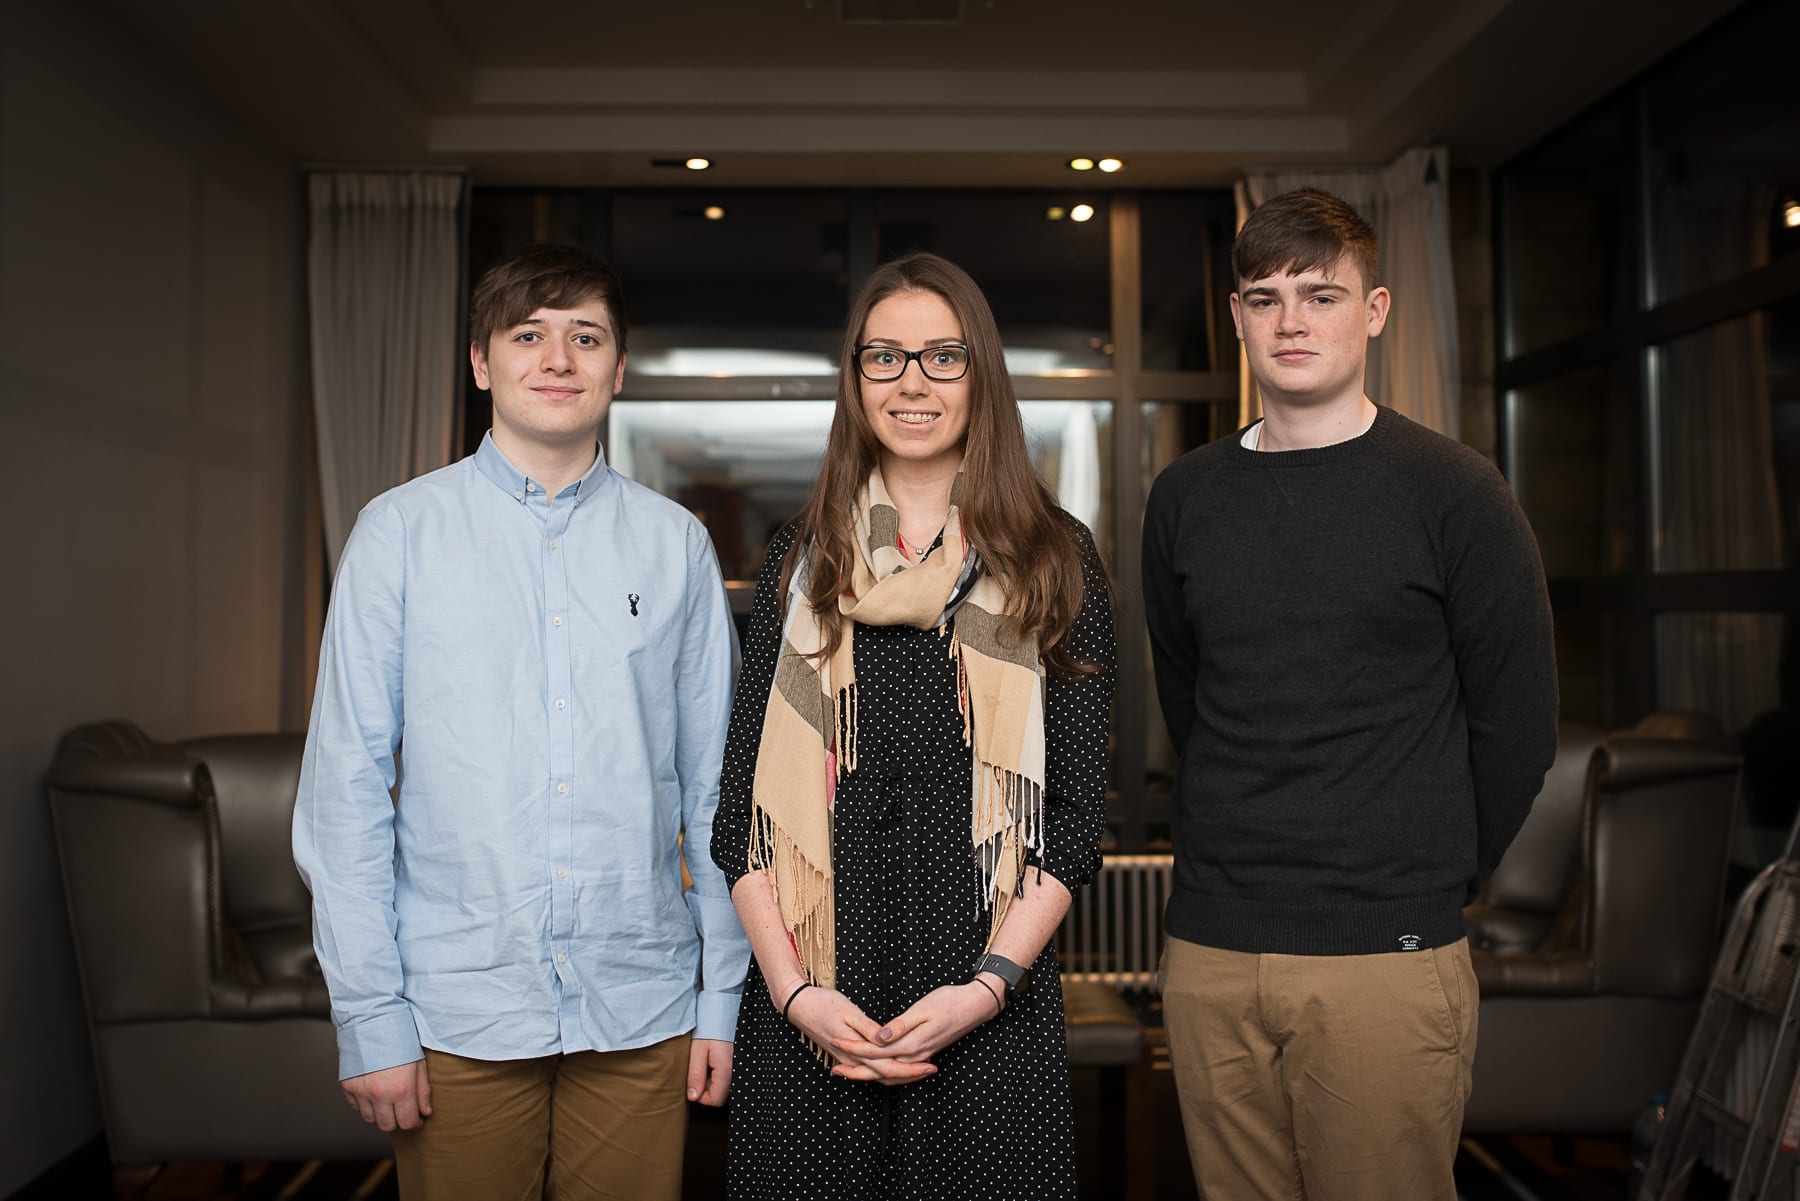 Economic Breakfast Briefing; European and Local Economic Outlook In association with the Limerick Post which took place in the Castletroy Park Hotel on Monday 11th Feb 2019:  From left to right:Peter Dunne, Claire Flynn and Brian Connell all from Northern Trust
 Image by Morning Star Photography